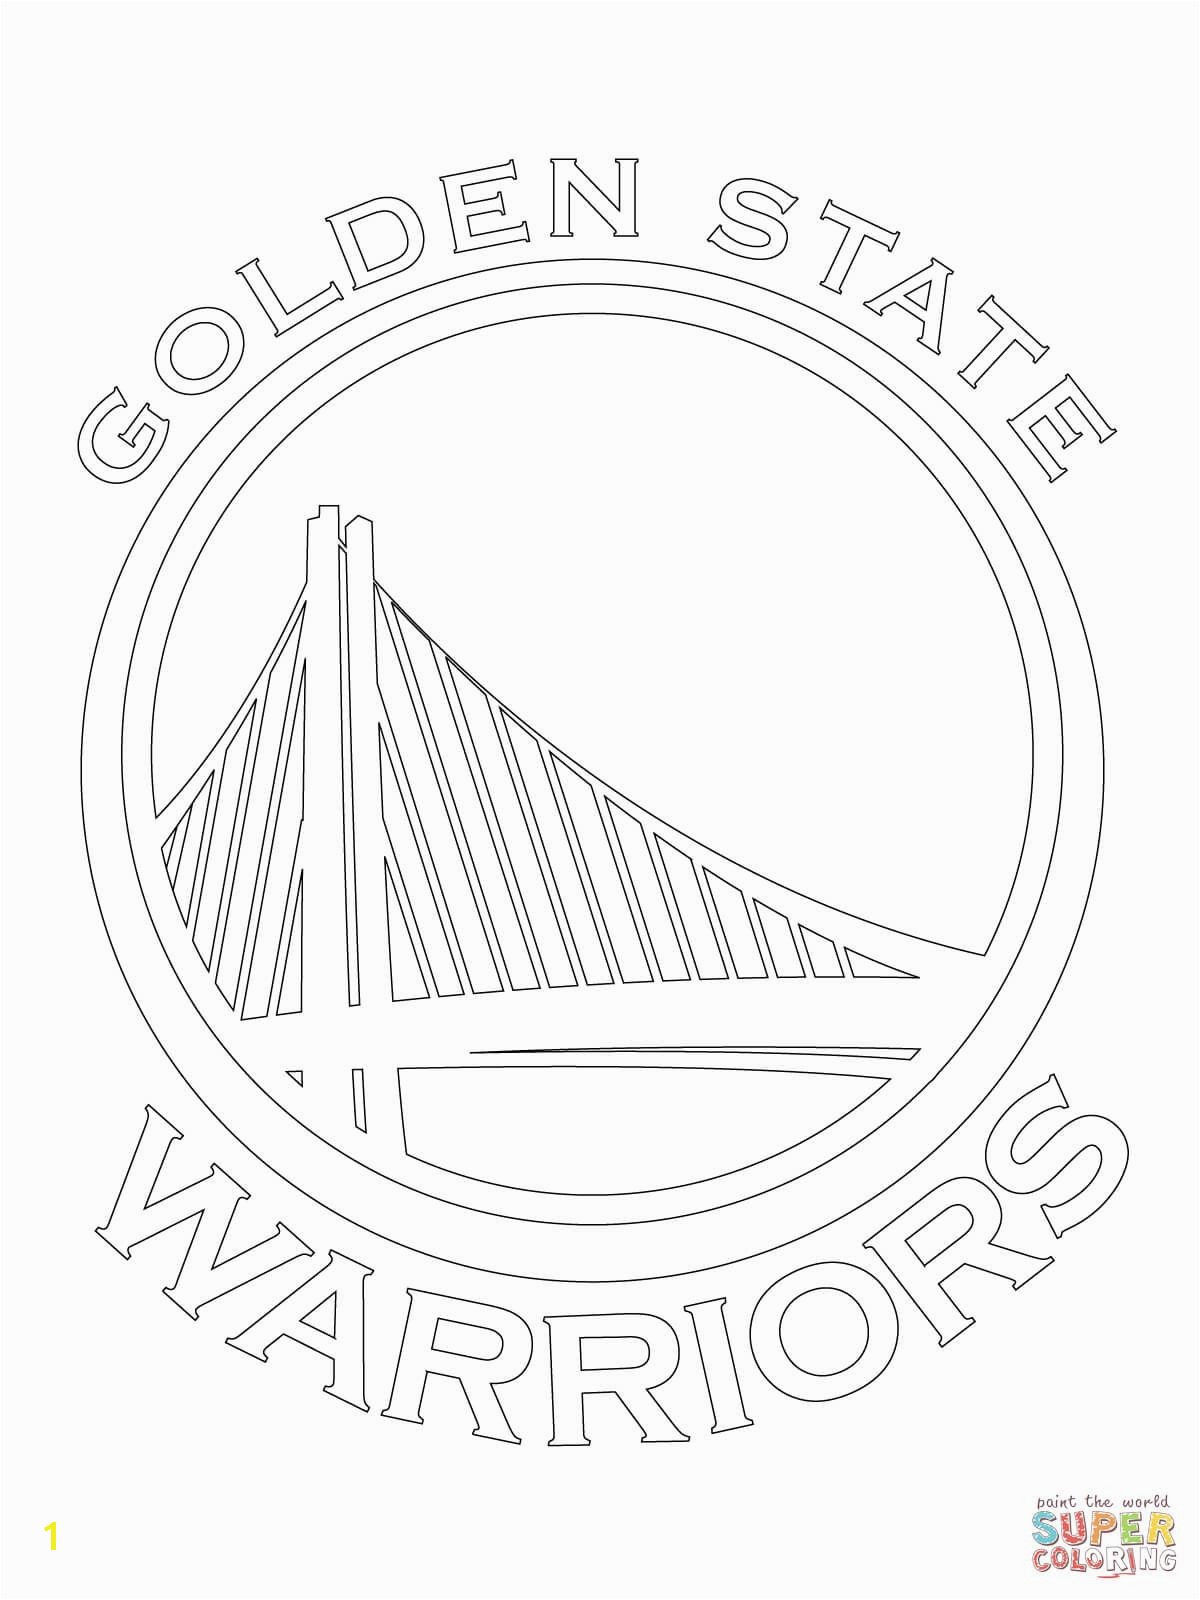 Russell Westbrook Coloring Pages State Warriors Logo Coloring Page